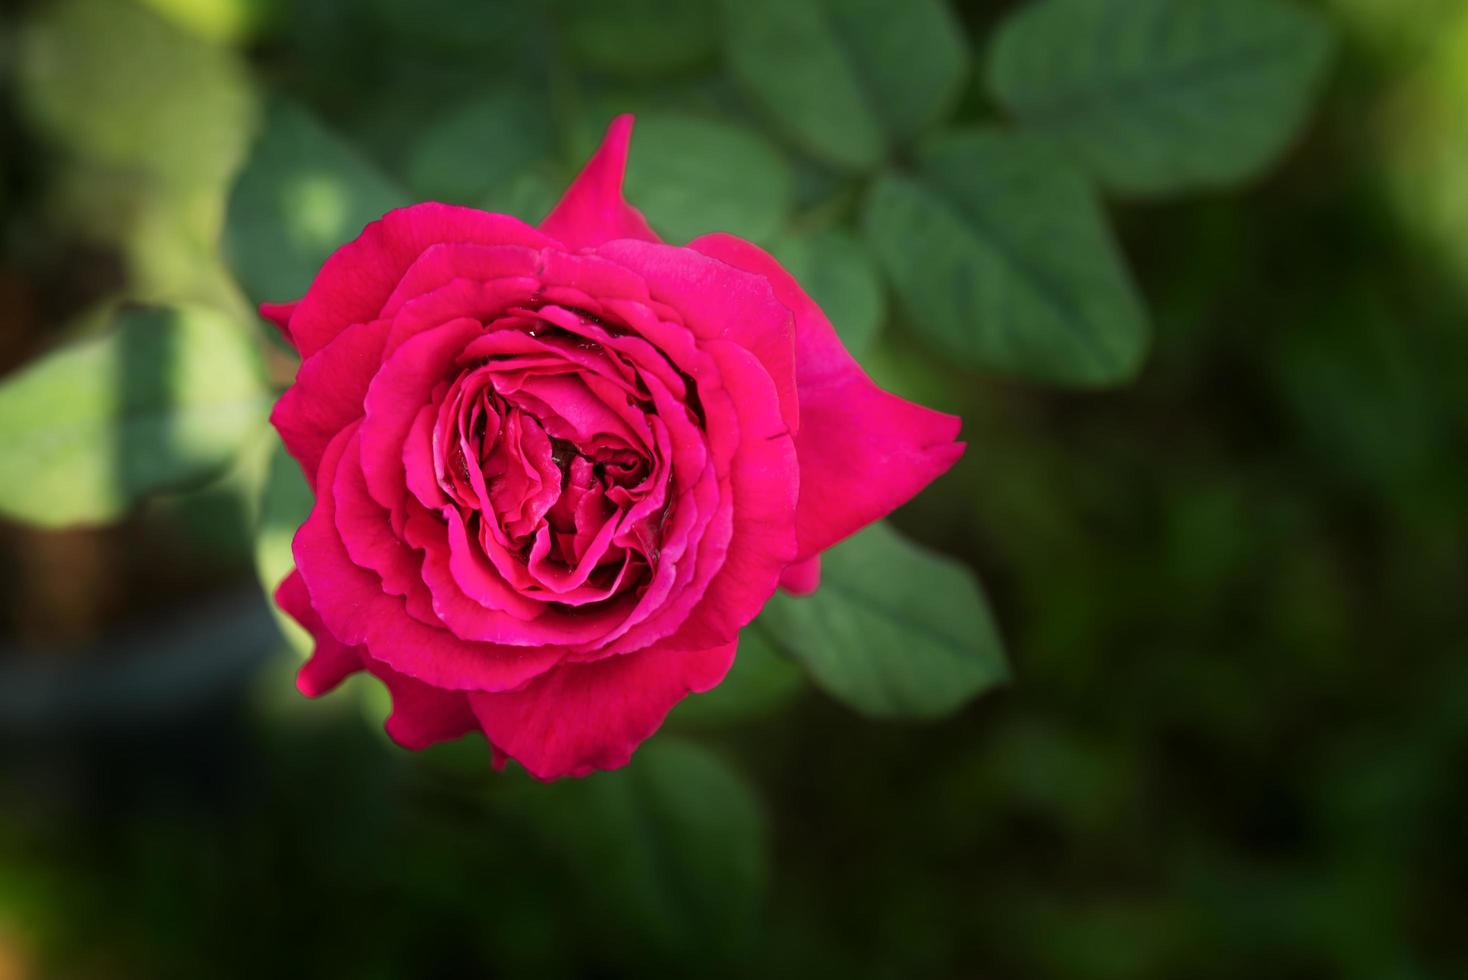 Red rose in a garden photo